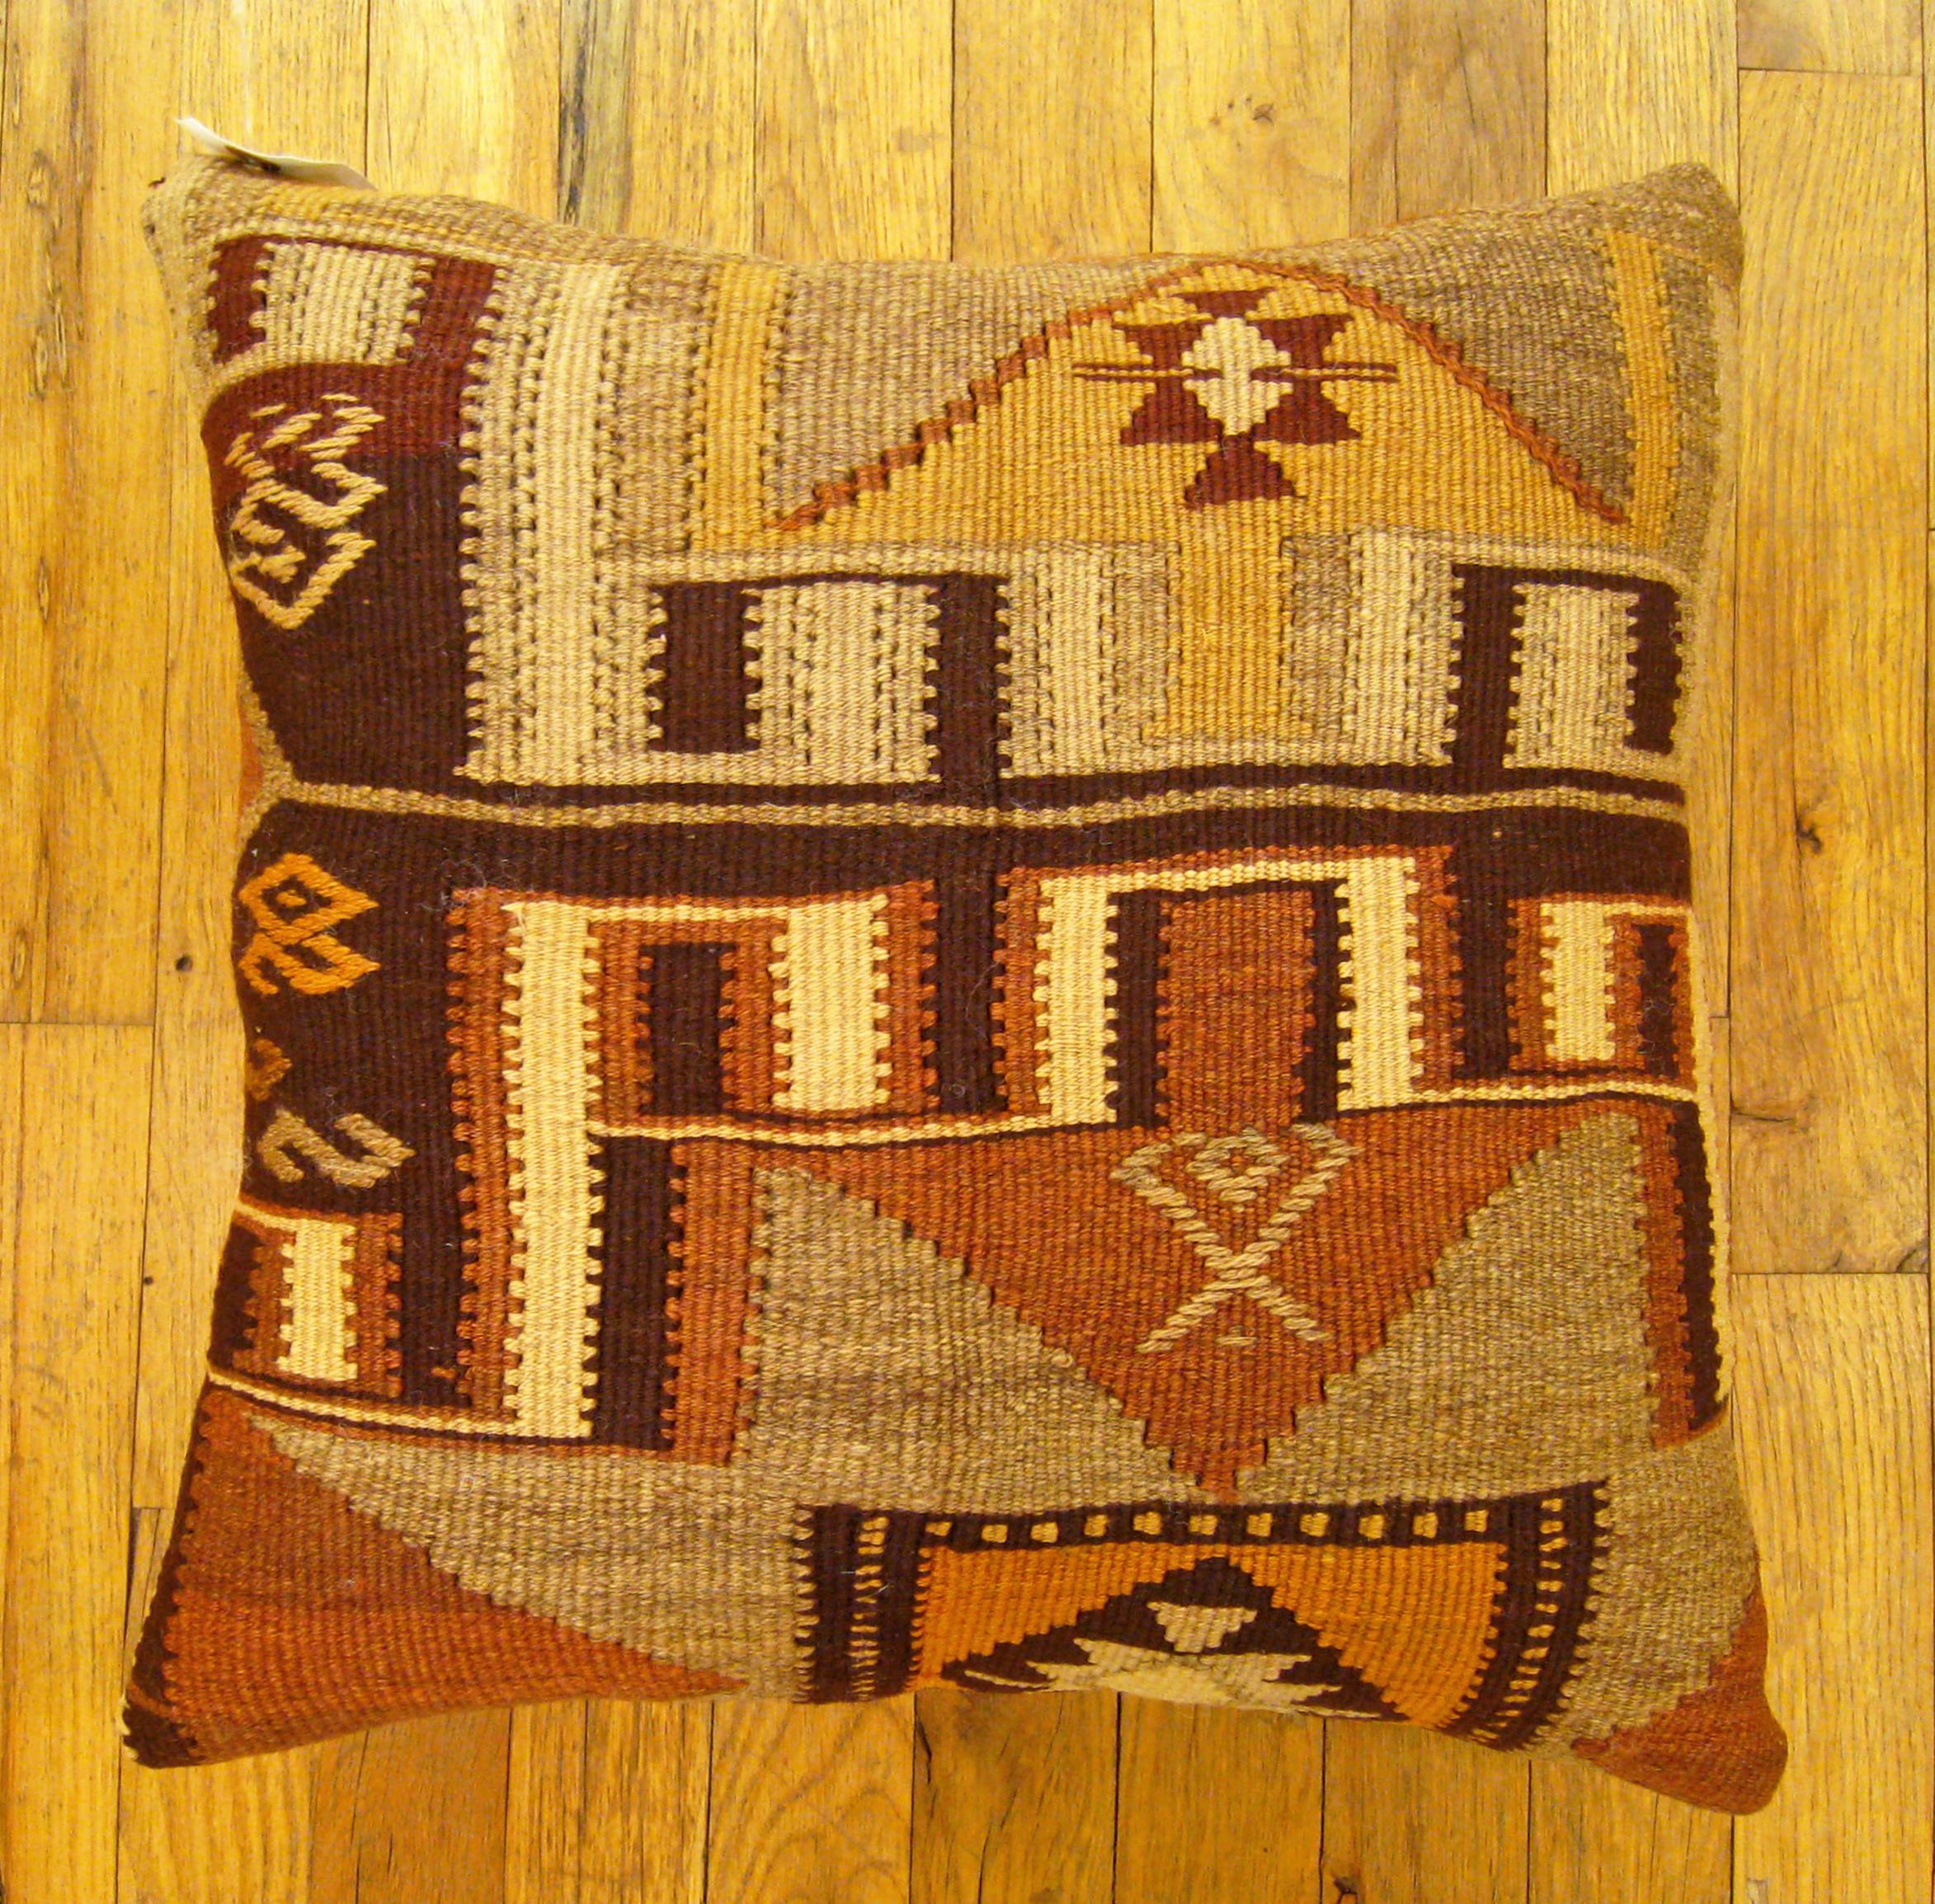 Vintage Turkish Kilim Rug Pillow; size 17” x 18”.

A vintage decorative pillow with geometric abstracts allover a brown central field, size 17” x 18”. This lovely decorative pillow features a vintage fabric of a KIilim carpet on front which is